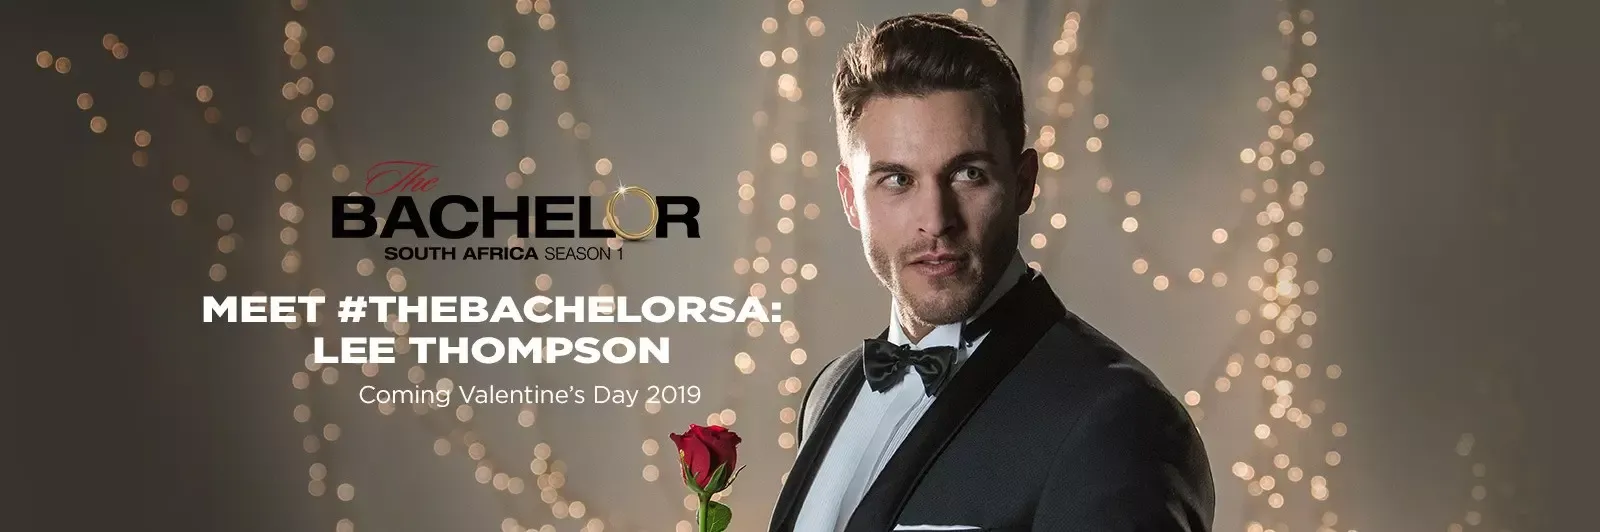 Communication - Bachelor South Africa - Lee Thompson - Season 1 - Media SM - *Sleuthing Spoilers* 1538985735-27_The_Bachelor_Article_